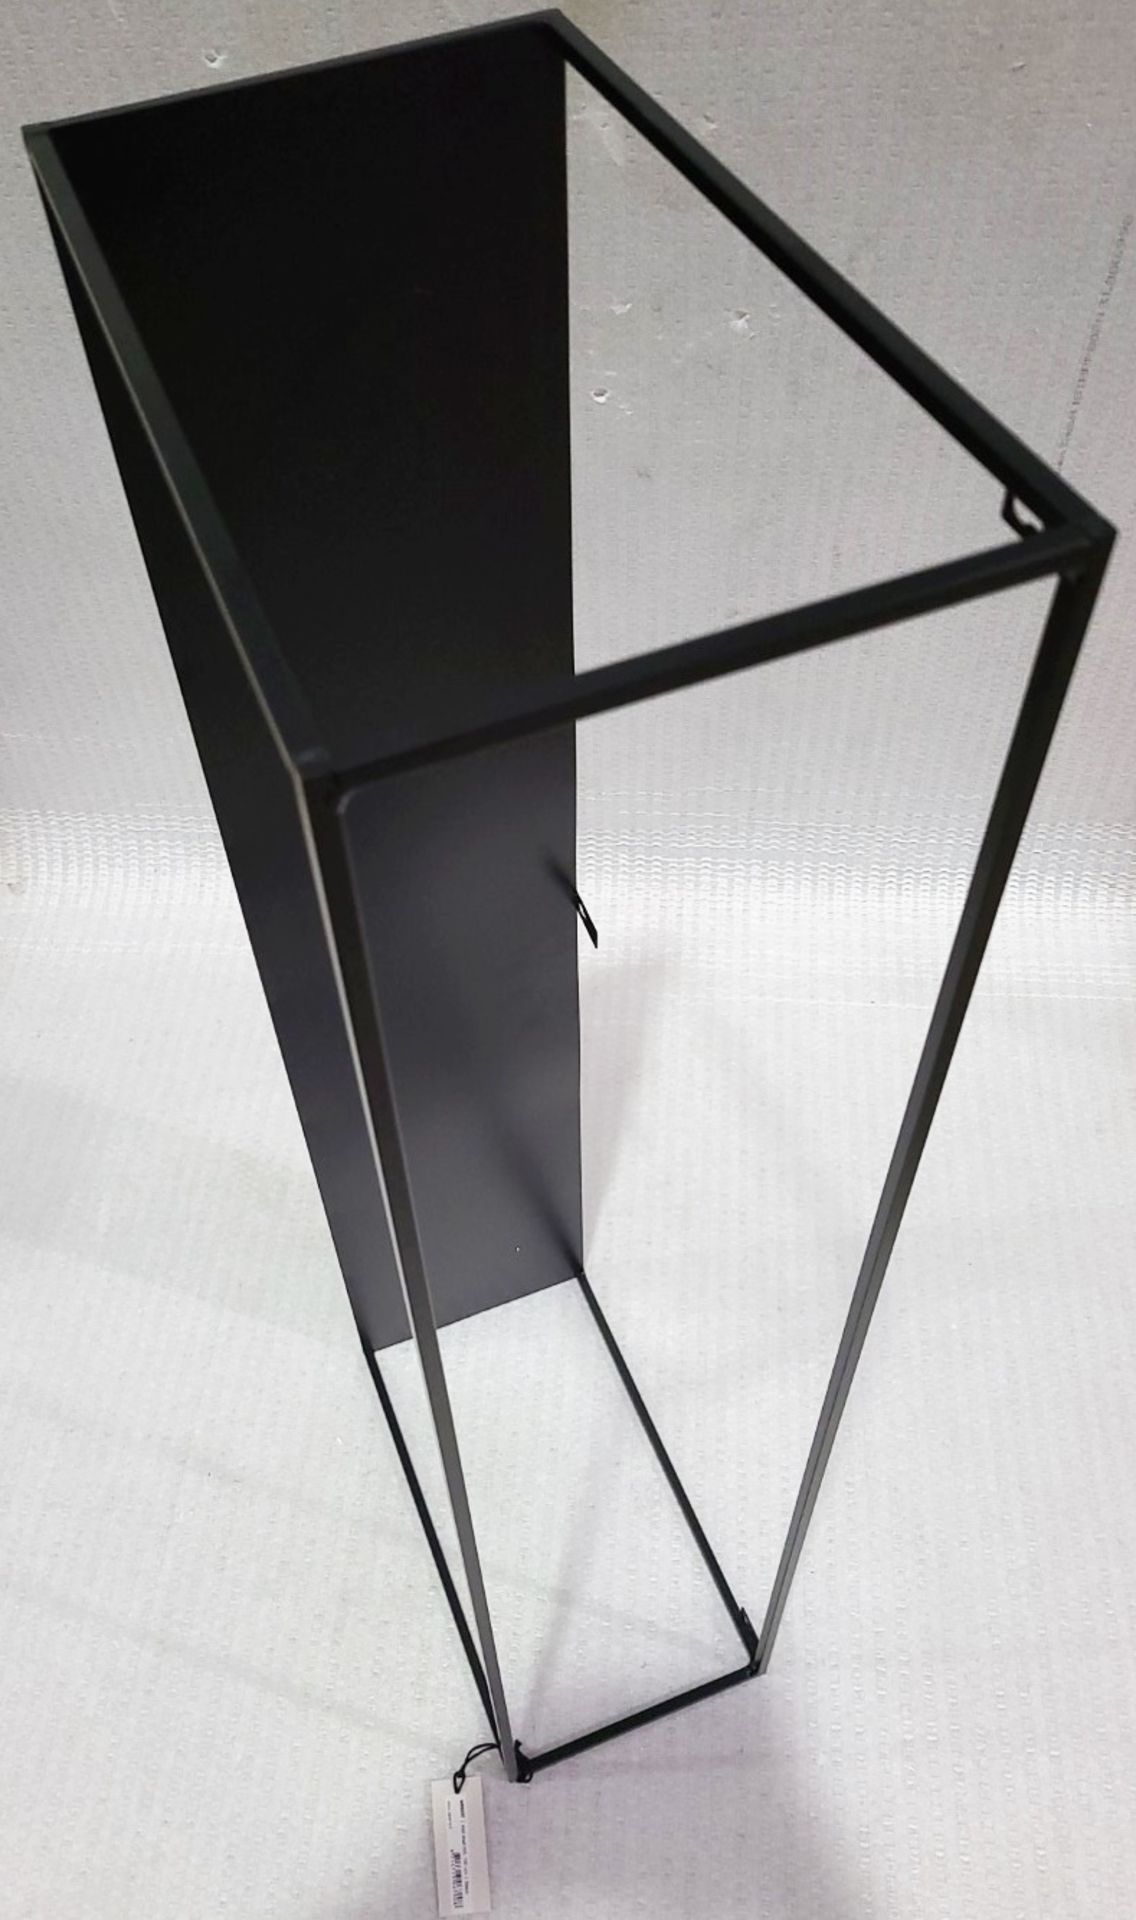 1 x WOOOD 'Meert' Black Metal Extra Storage Wall Shelf With Black Lacquered Finish 100cm - Image 4 of 7